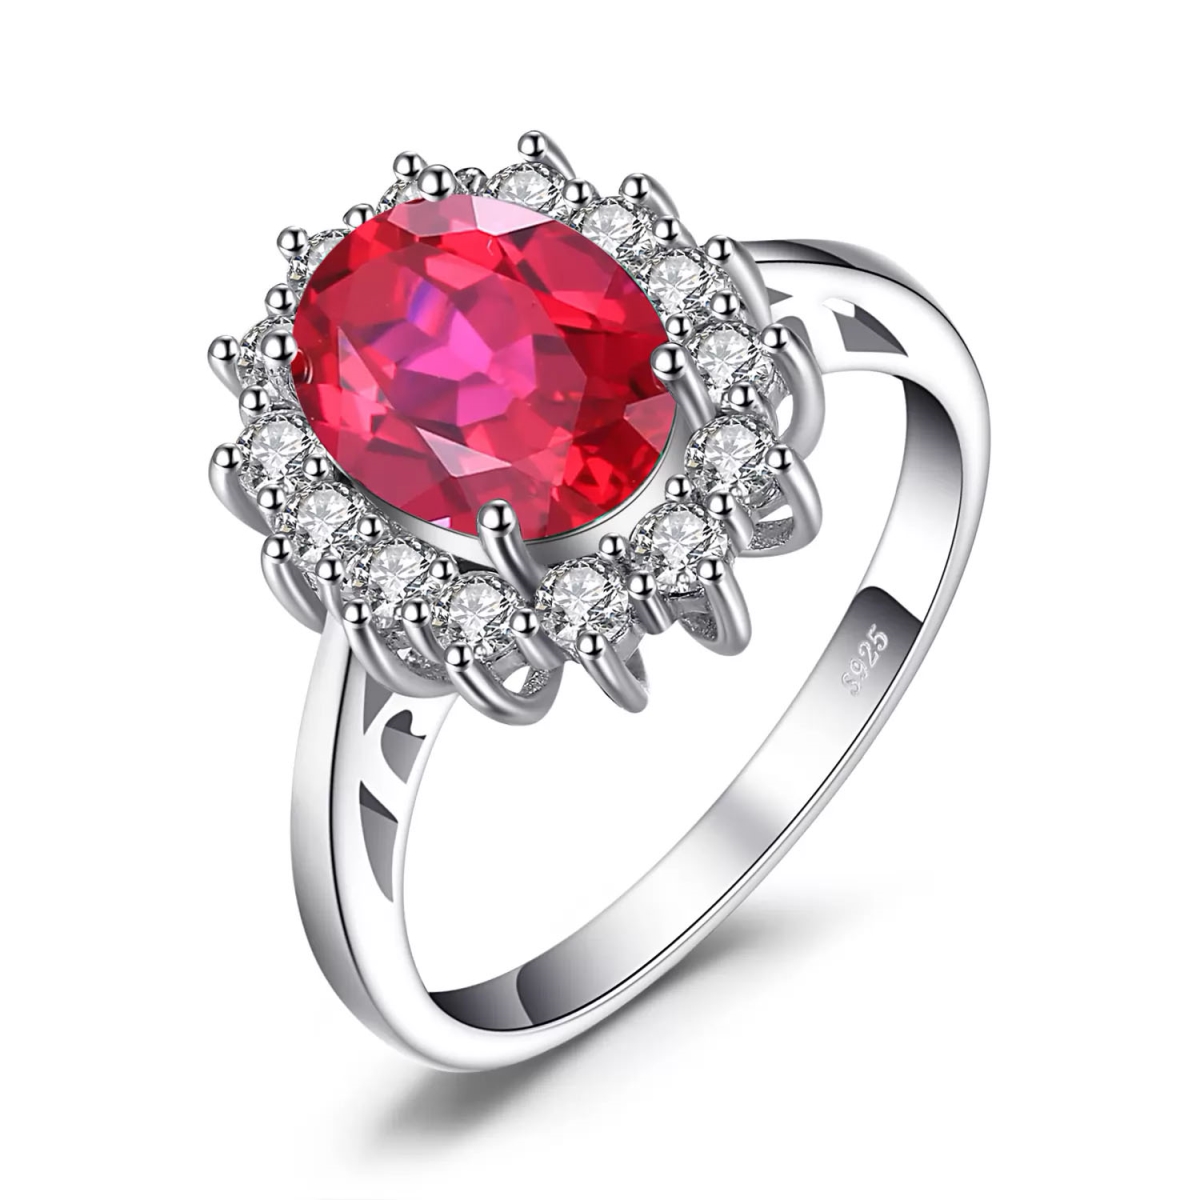 MDS210168 Oval Red Nano Ruby Halo Cocktail Ring in 0.925 White Sterling Silver - Size 6 -  Majesty Diamonds